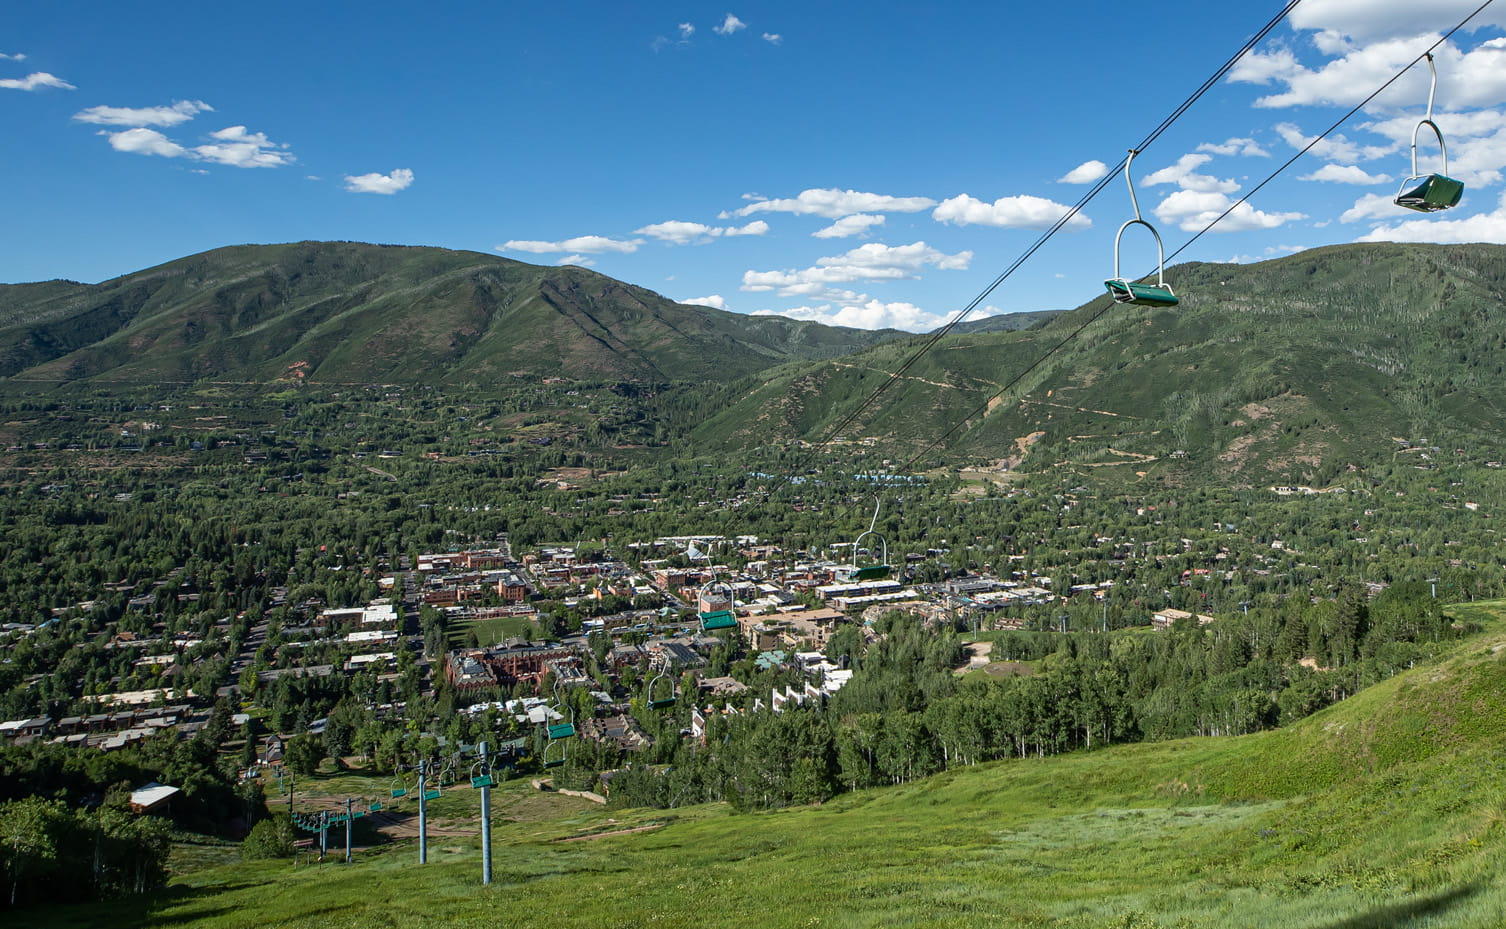 Aspen hotels and lodges, and more for summer trips to Aspen Snowmass